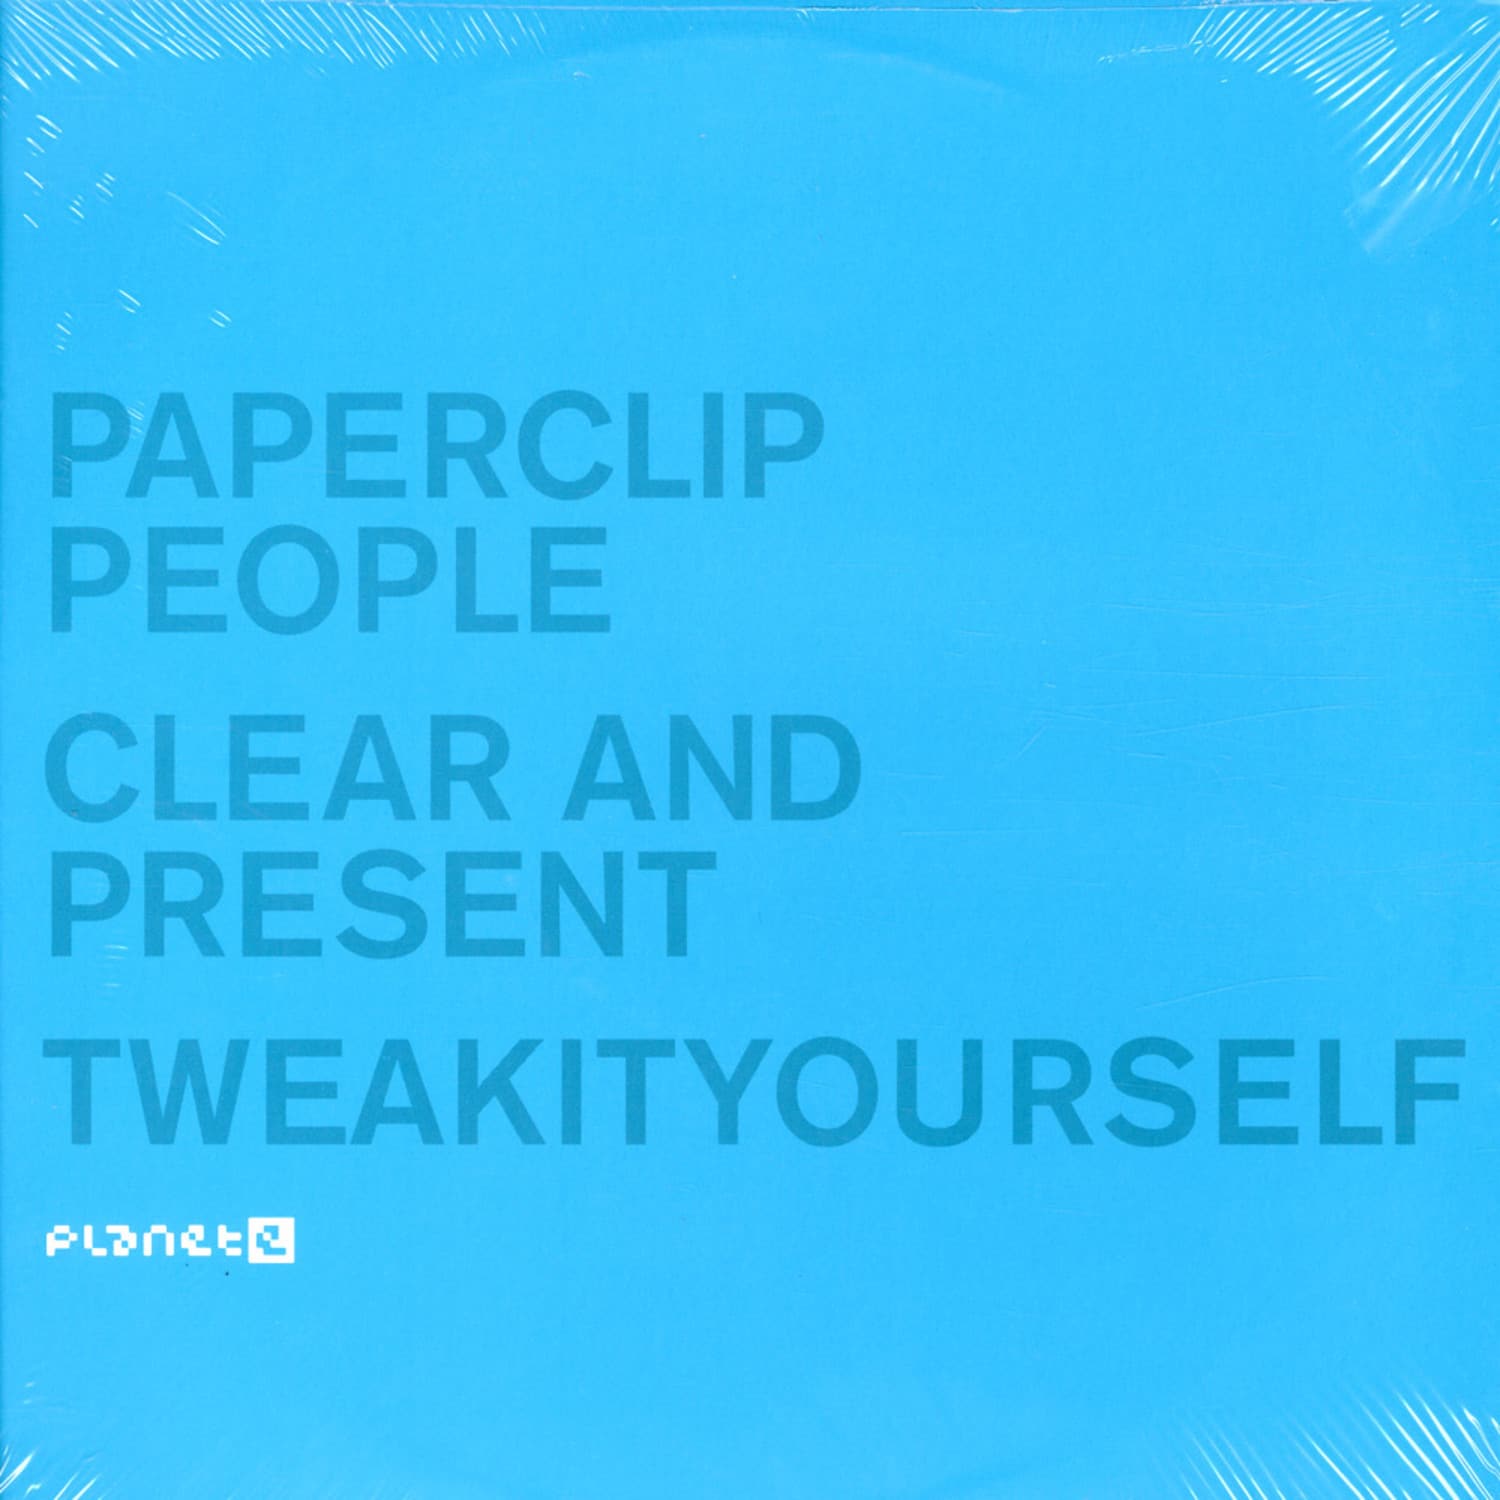 Paperclip People - CLEAR AND PRESENT